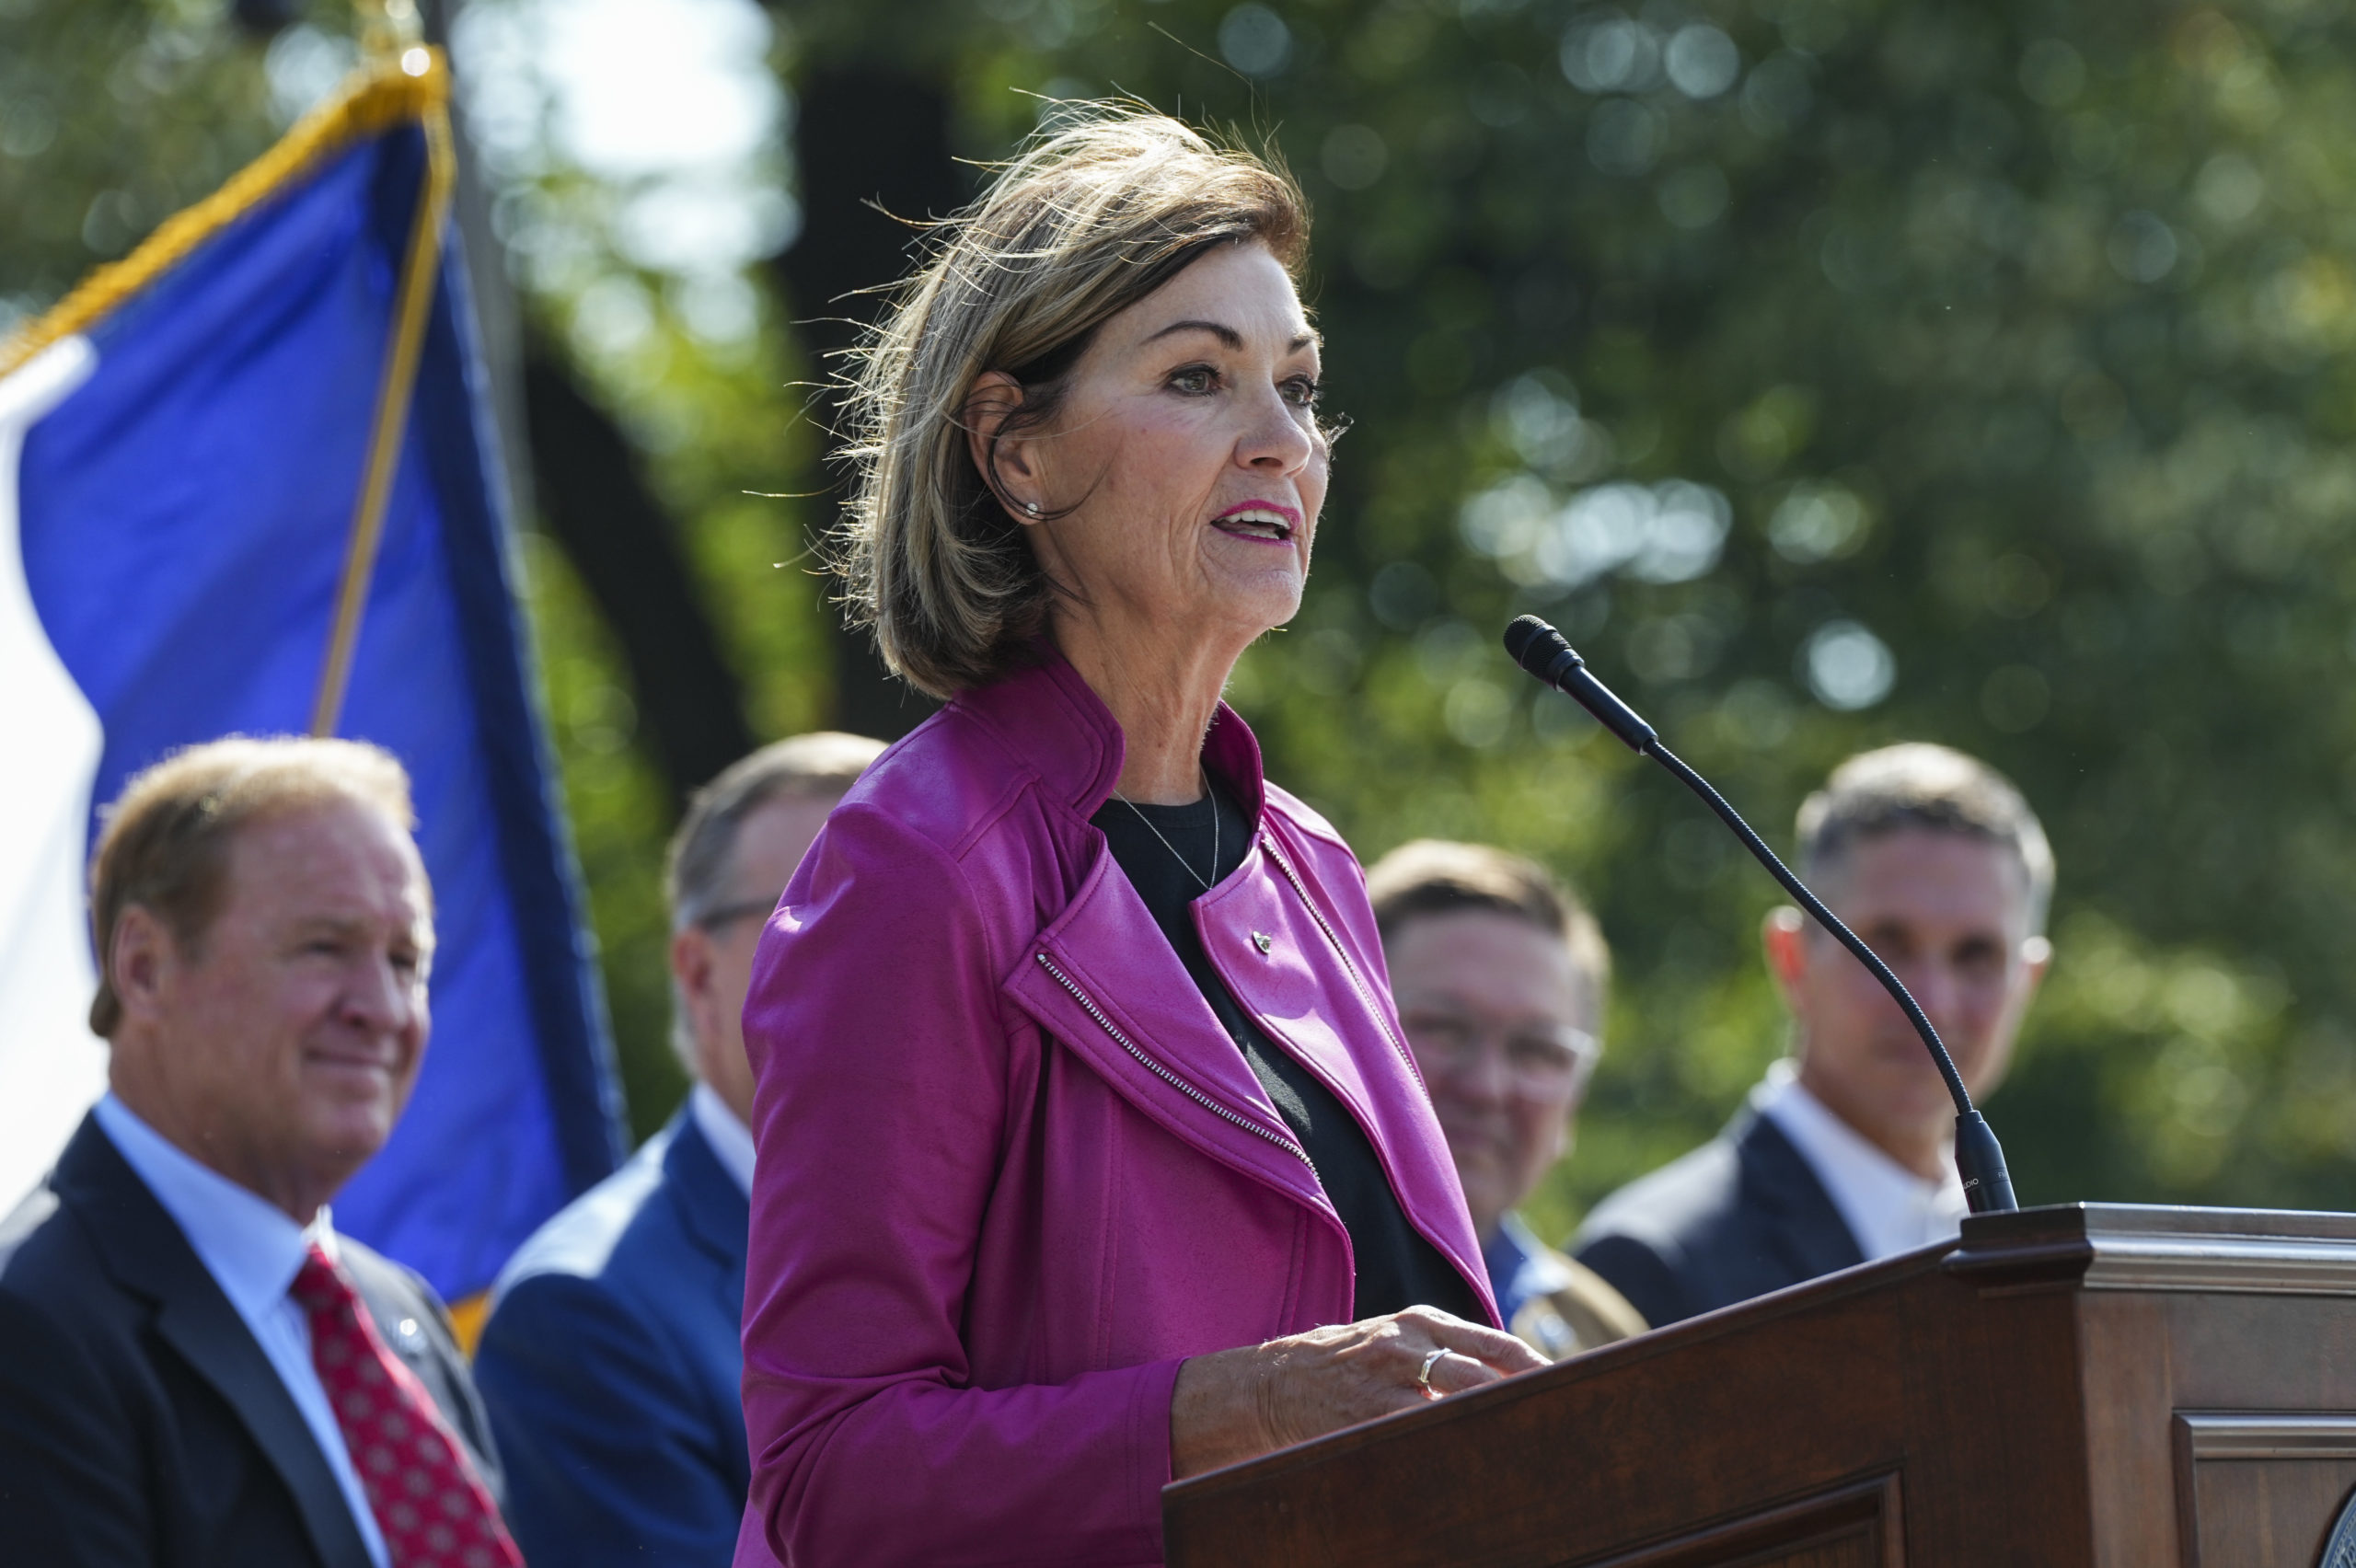 DES MOINES, IOWA - OCTOBER 3: Iowa Governor, Kim Reynolds speaks at a NASCAR press conference at the Iowa State Capitol on October 3, 2023 in Des Moines, Iowa. (Photo by Jay Biggerstaff/Getty Images)